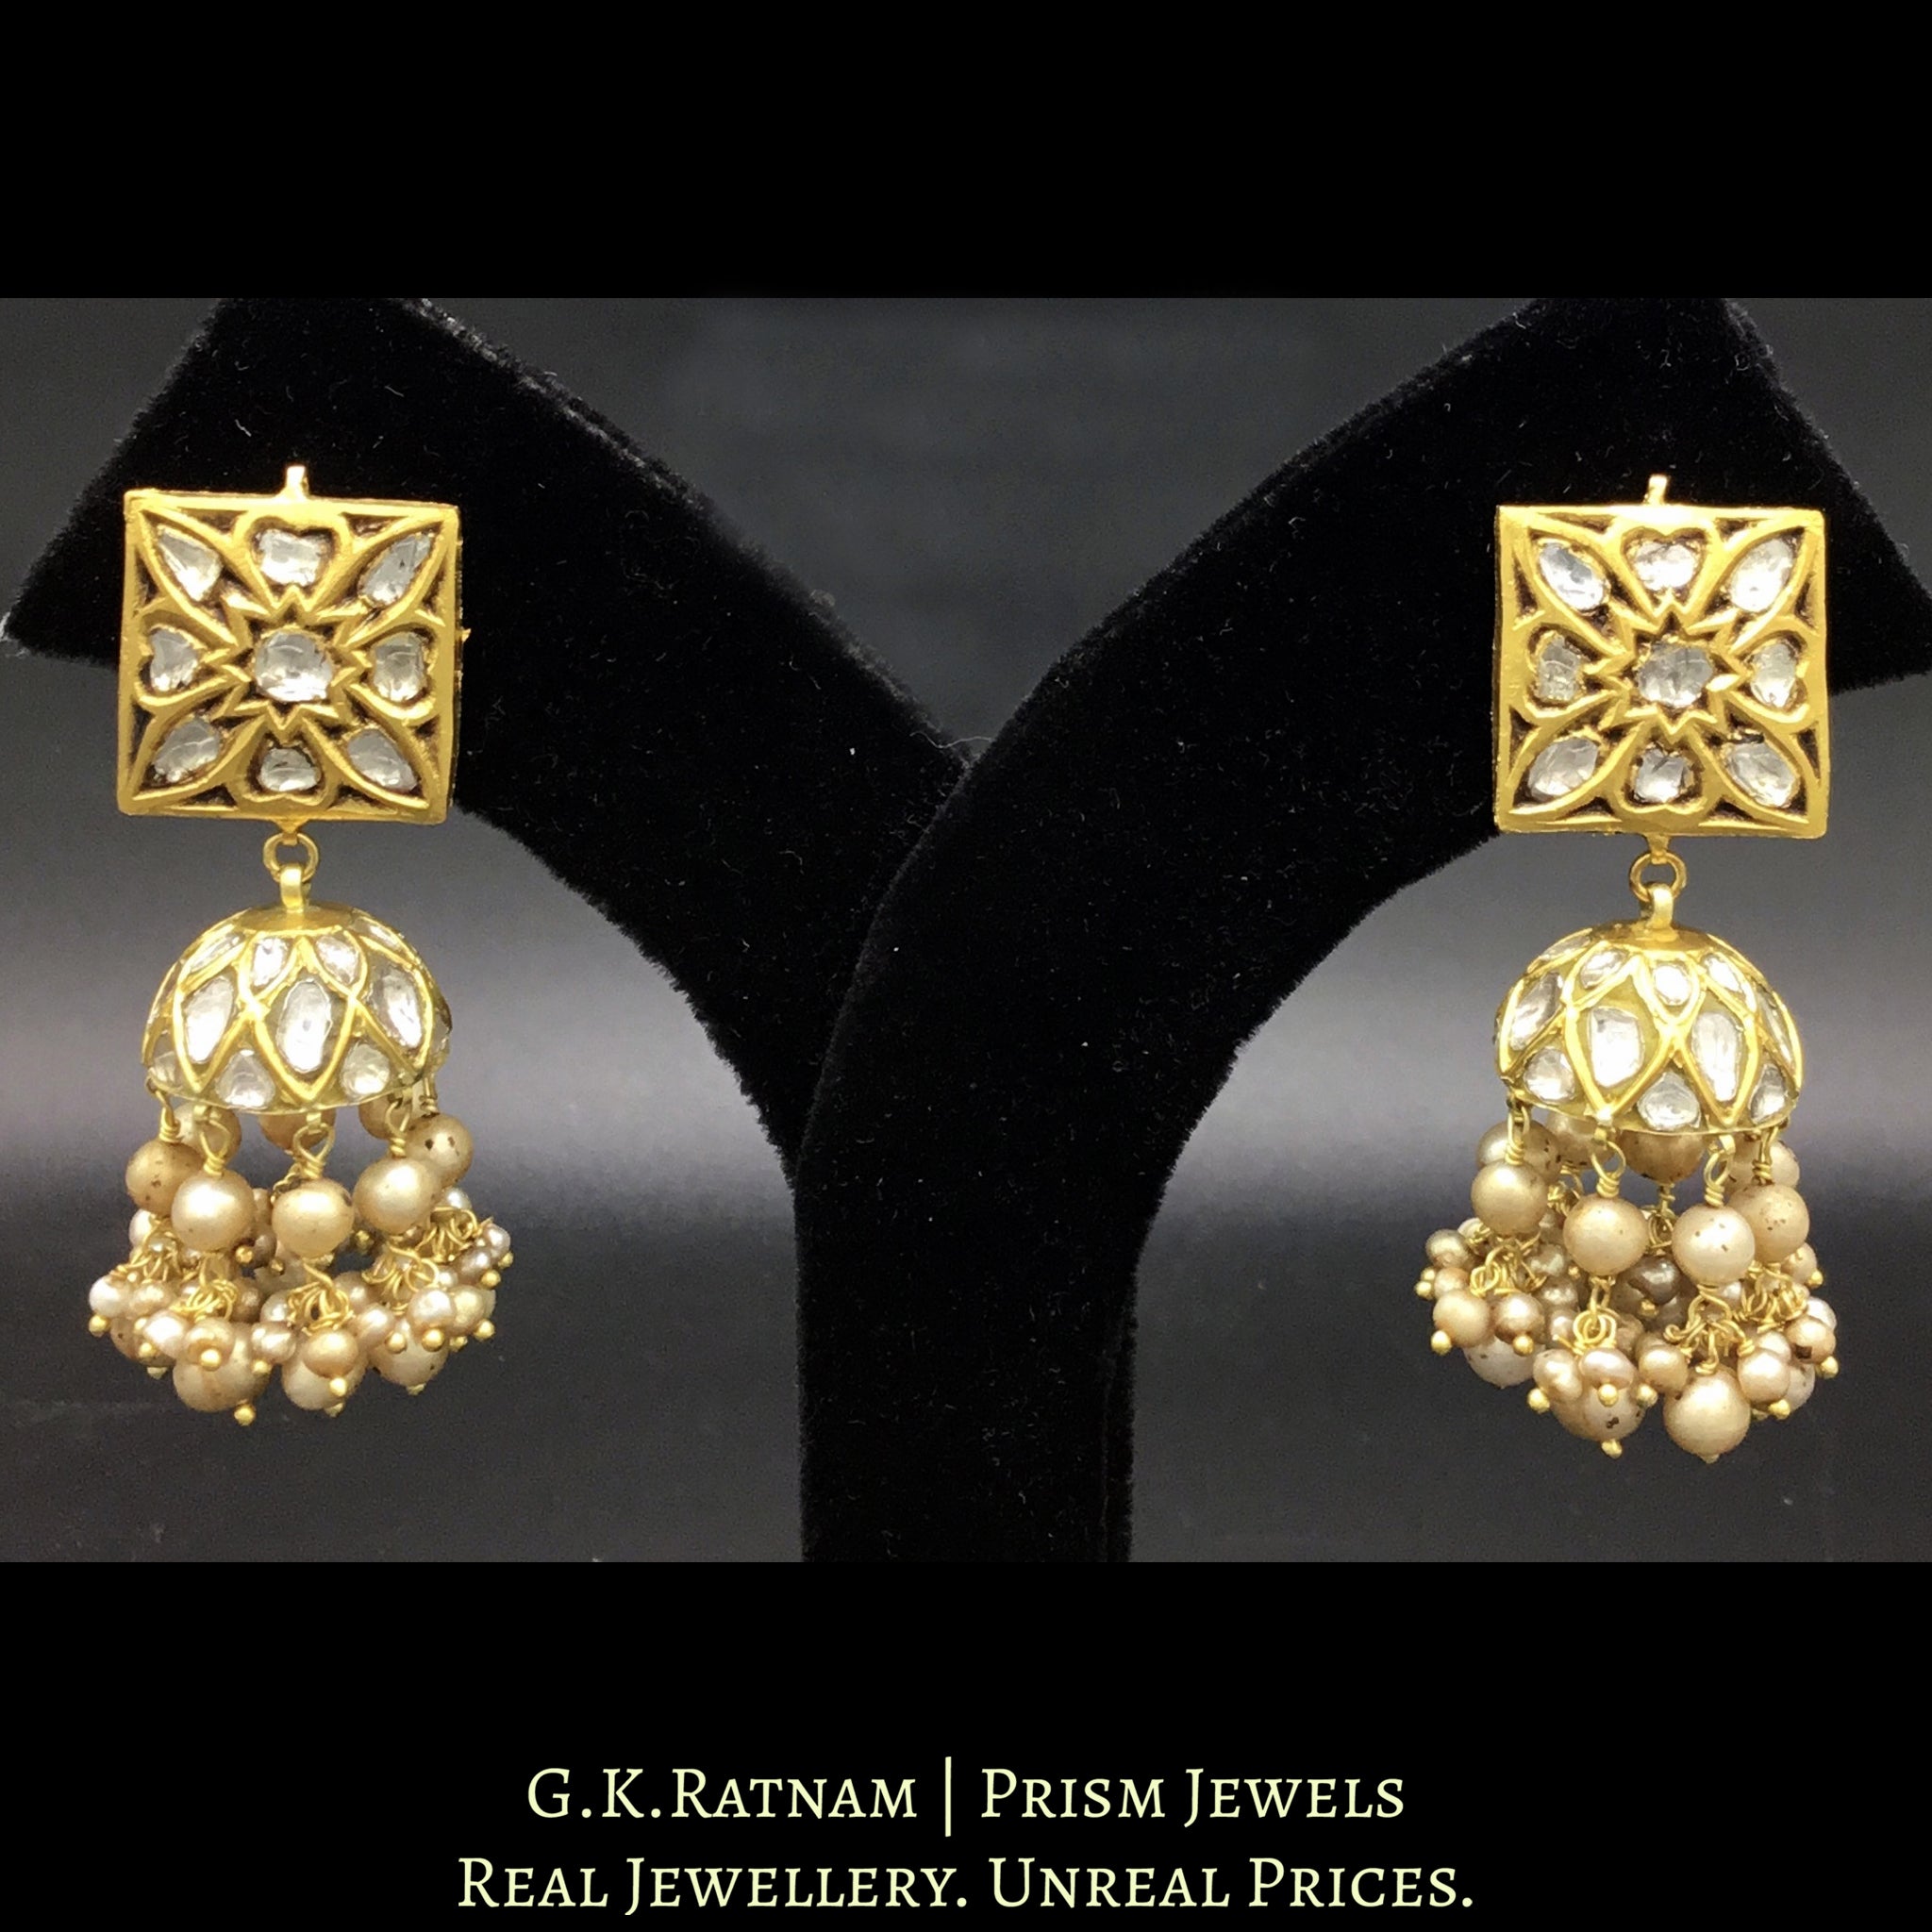 23k Gold and Diamond Polki Square Tops and Jhumki Earring Pair with antiqued freshwater pearls